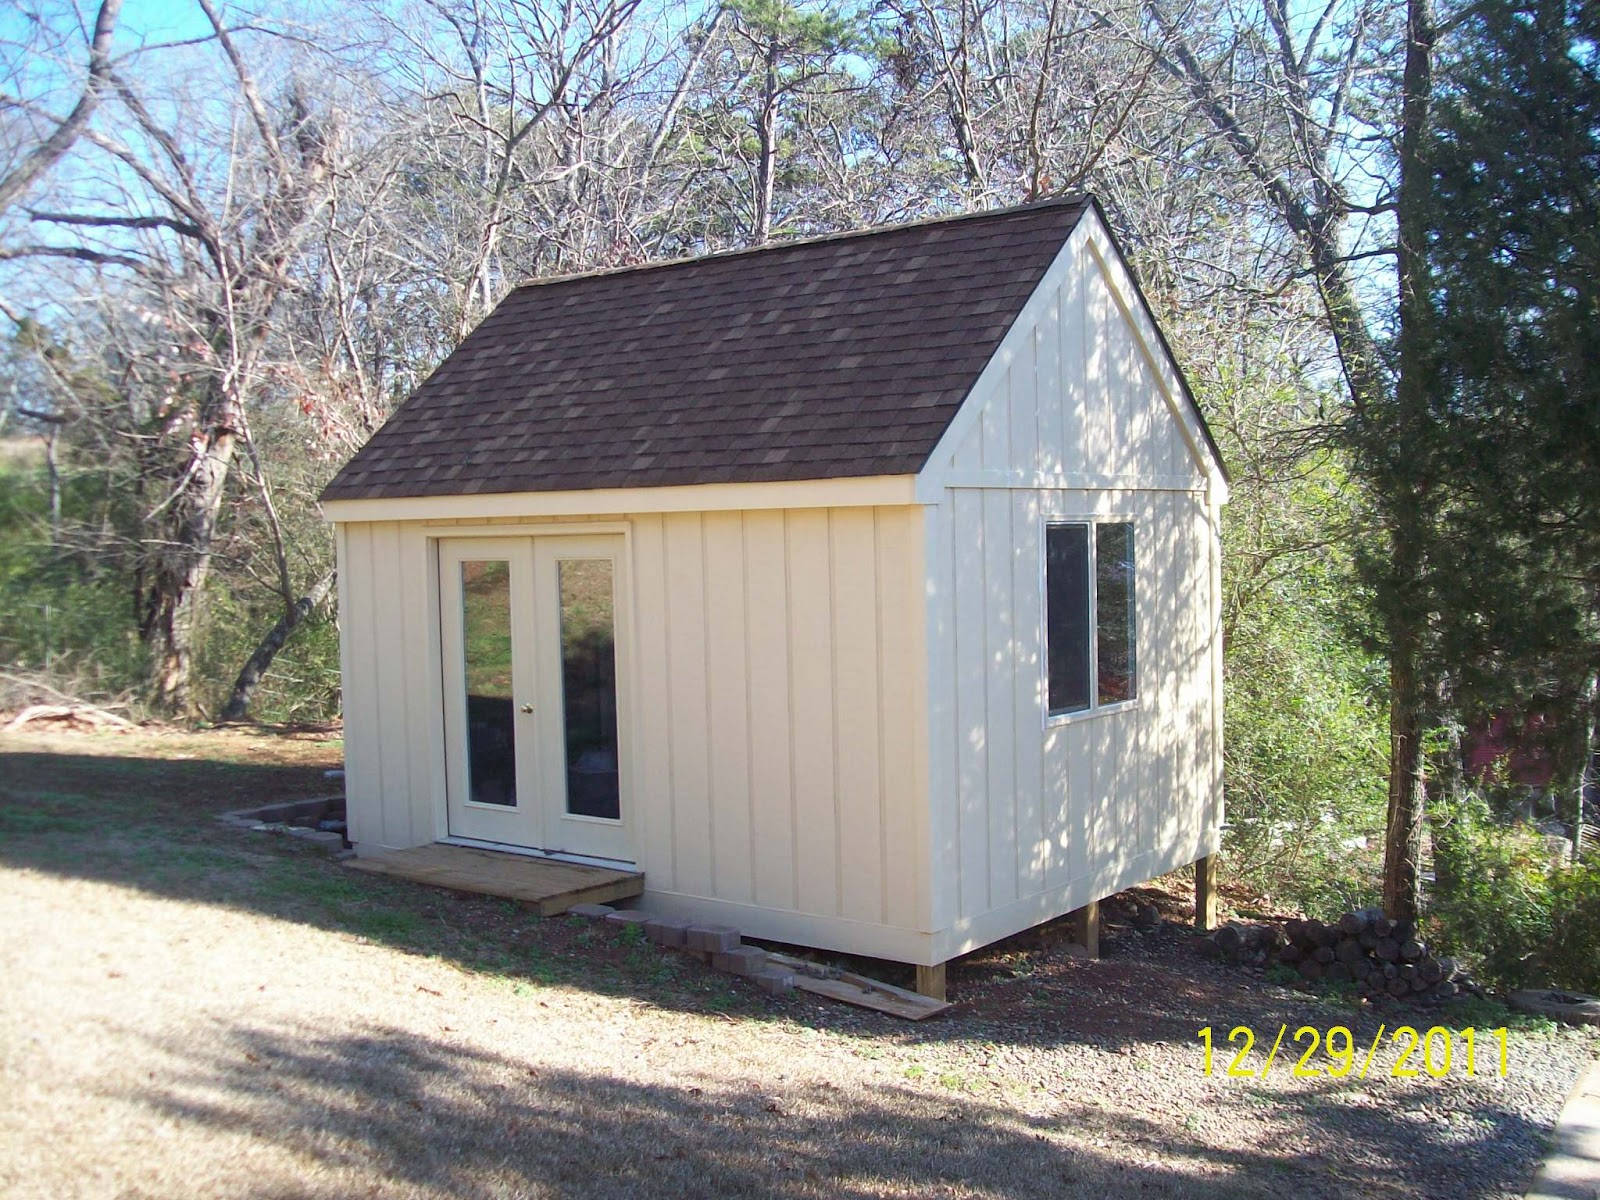 Free 12x16 shed plans 8x16 deck must see Compare - GH Sheds